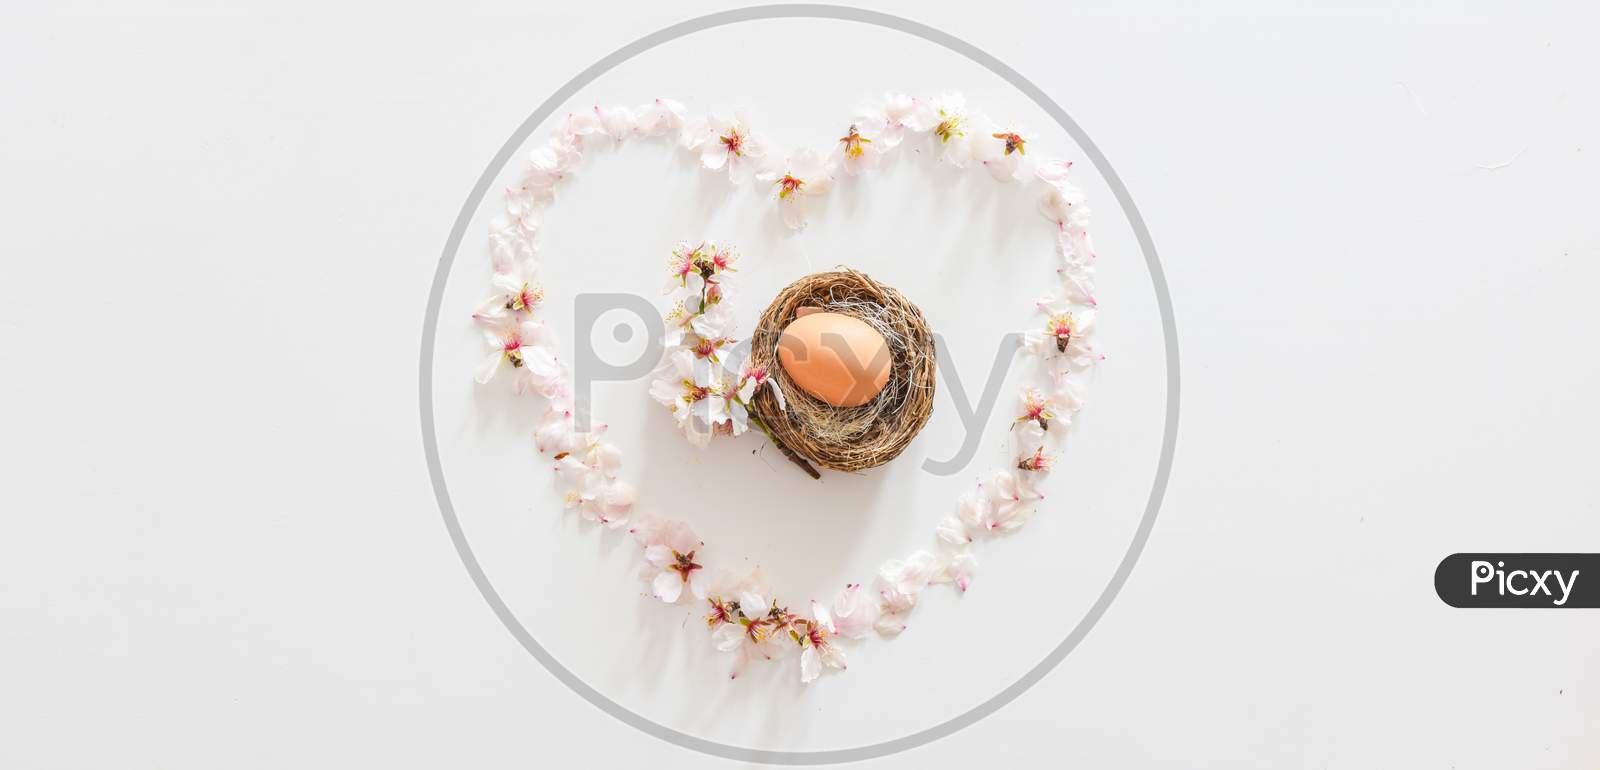 Spring Daisy Flowers Formed Heart With Easter Egg And Daisy Flower In Middle. Symbolic New Beginnings And Newborn Concept